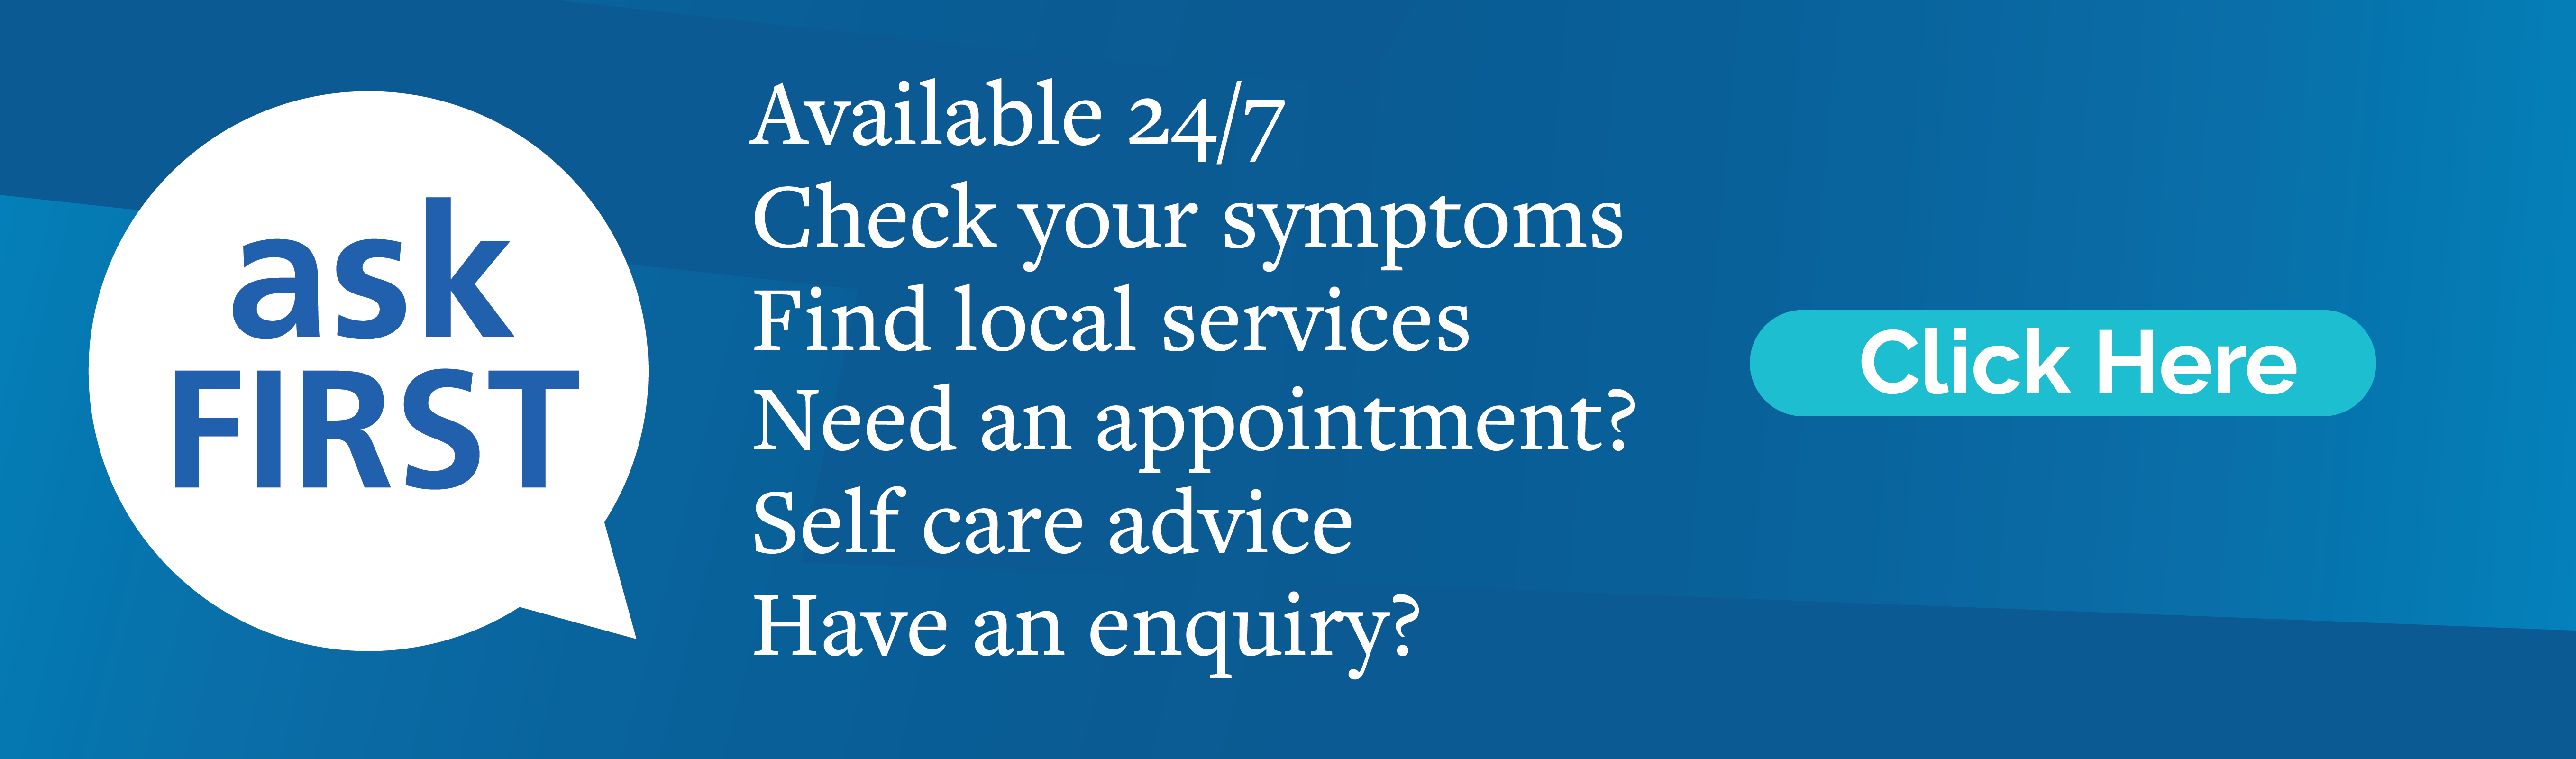 Ask First available 24 7 check your symptoms find local services need an appointment self care advice have an enquiry click here